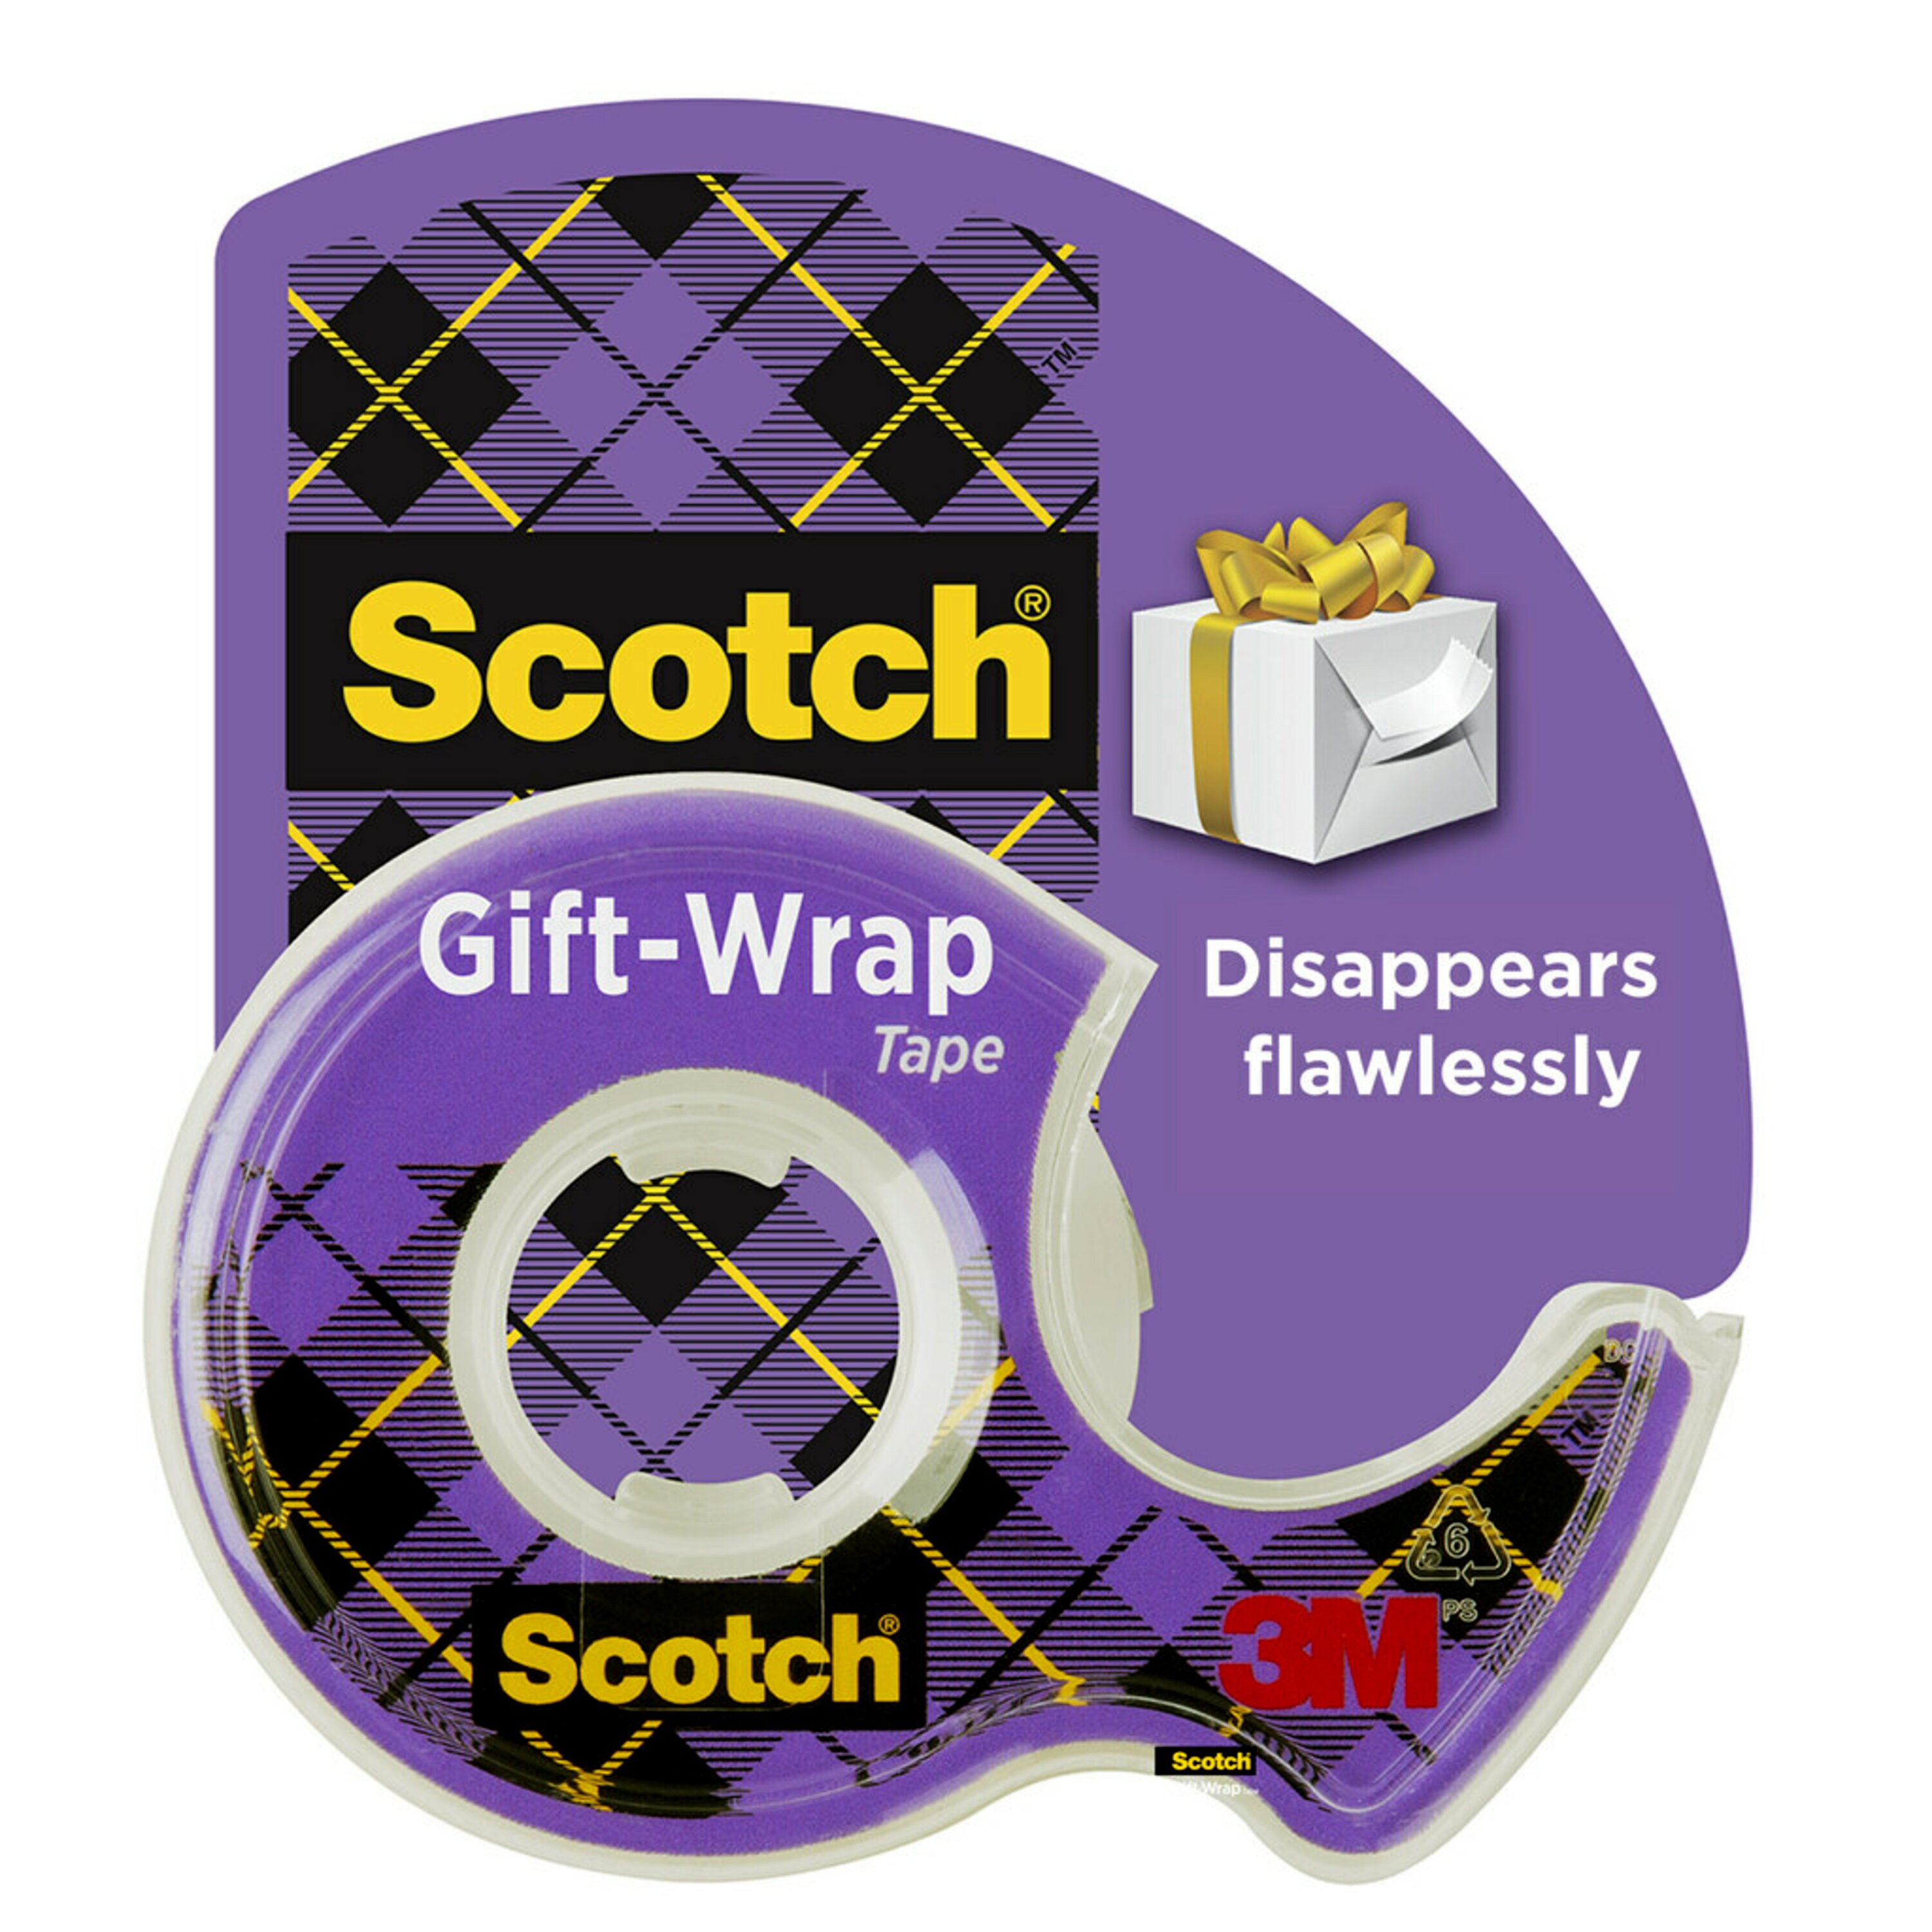 Scotch® Gift-Wrap Tape, 3/4 in. x 650 in., 1 Dispenser/Pack - image 1 of 15